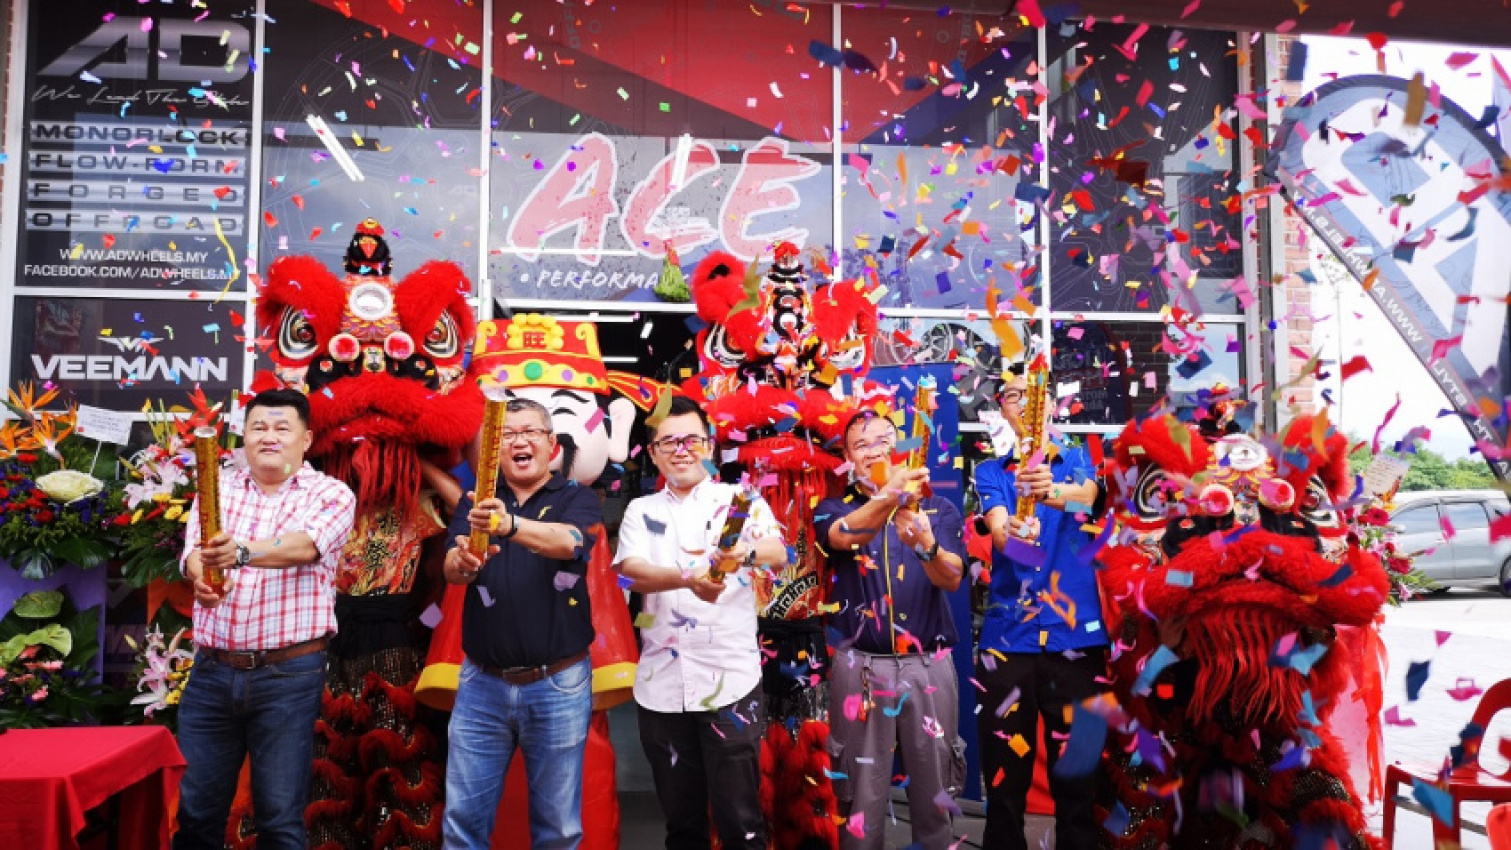 autos, cars, featured, ace performance wheel, automotive, goodyear, goodyear autocare, goodyear malaysia sdn bhd, goodyear tire & rubber company, malaysia, tyres, ace performance wheel goodyear autocare centre officially opened in rawang